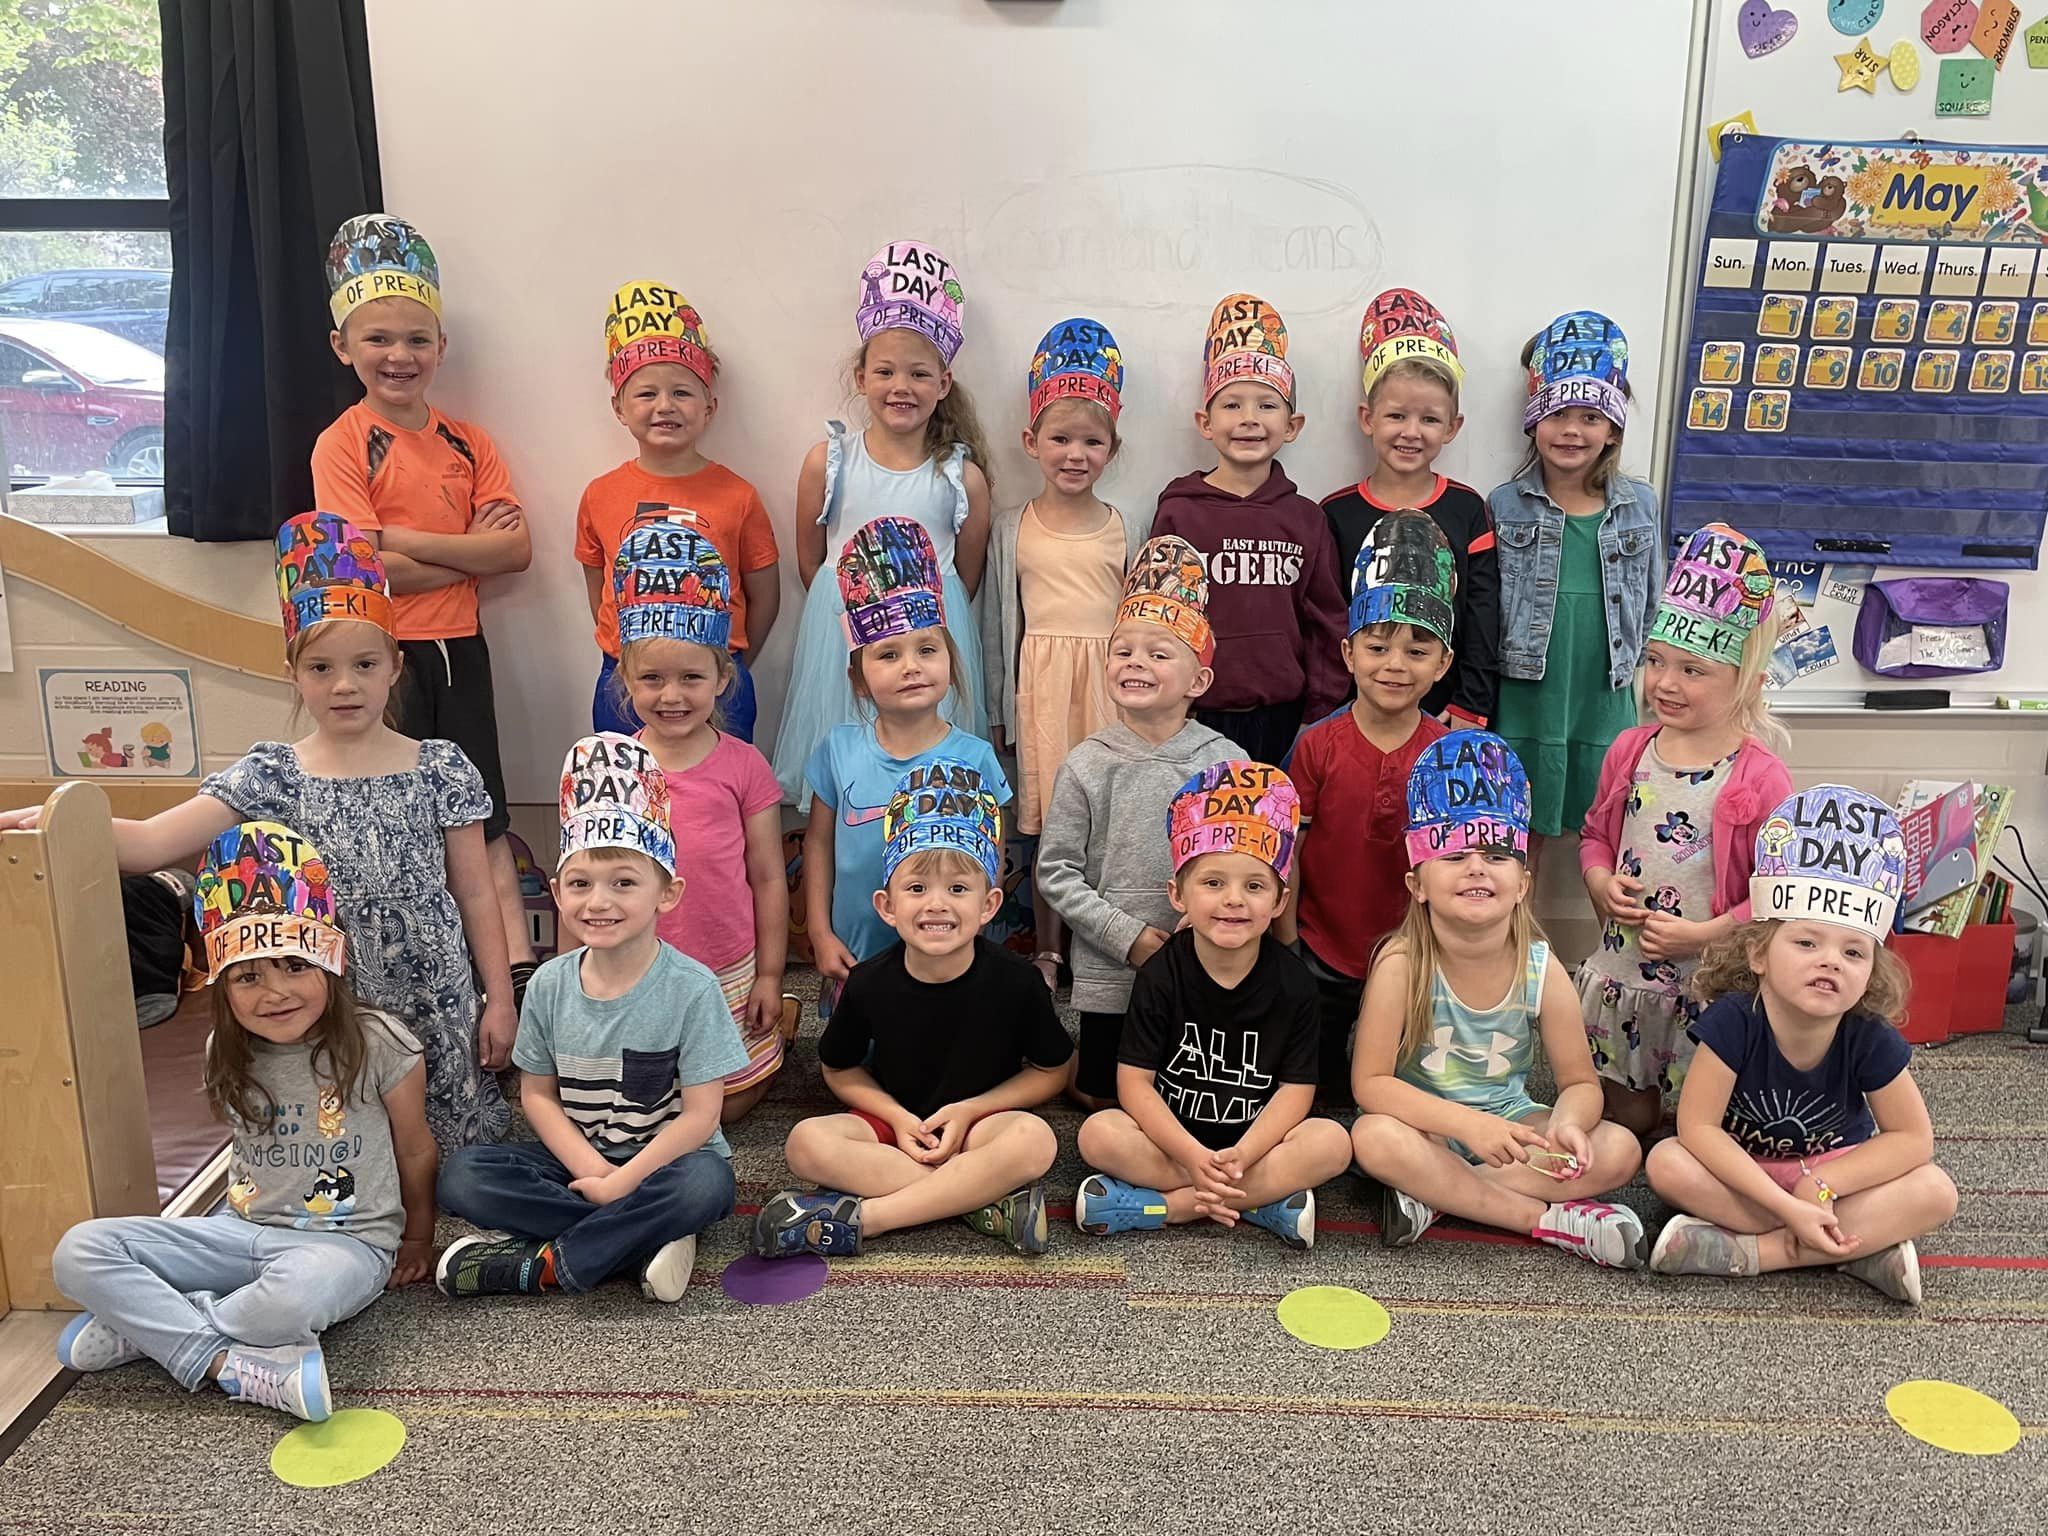 preschool students wearing crowns that say "the last day of school"